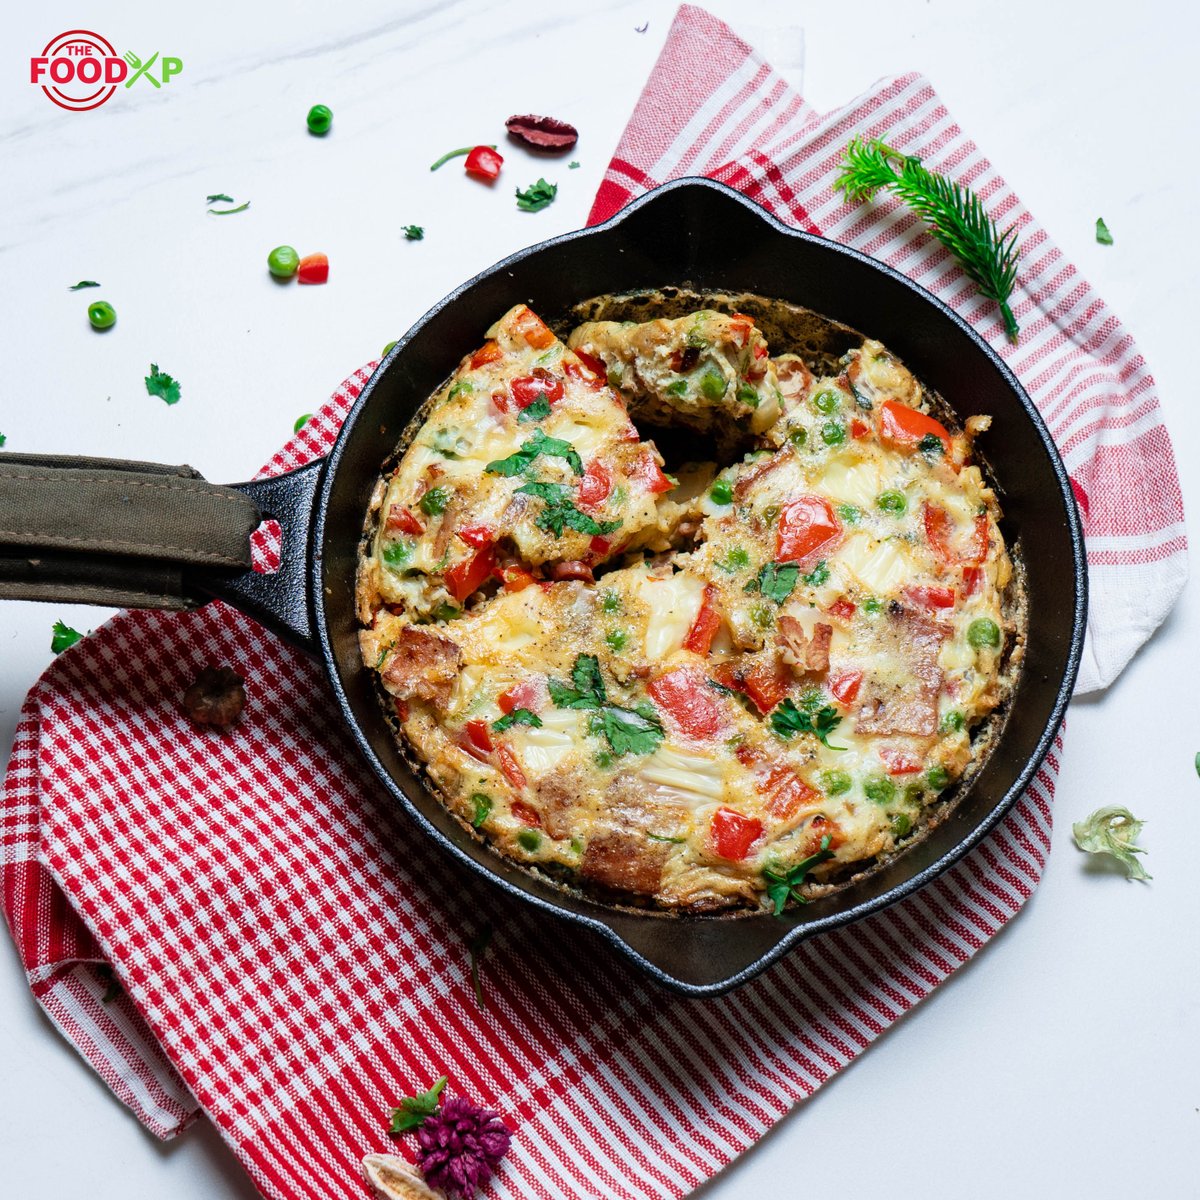 Gordon Ramsay’s egg frittata is an amazing Italian breakfast that has a delicious surprise with every bite. It is protein-rich and baked so it is as nutritious as it is delicious. You can easily learn to bake this dish at home. Click on the YouTube link,
https://t.co/McKoydk8Uc https://t.co/hN69zpsnv3